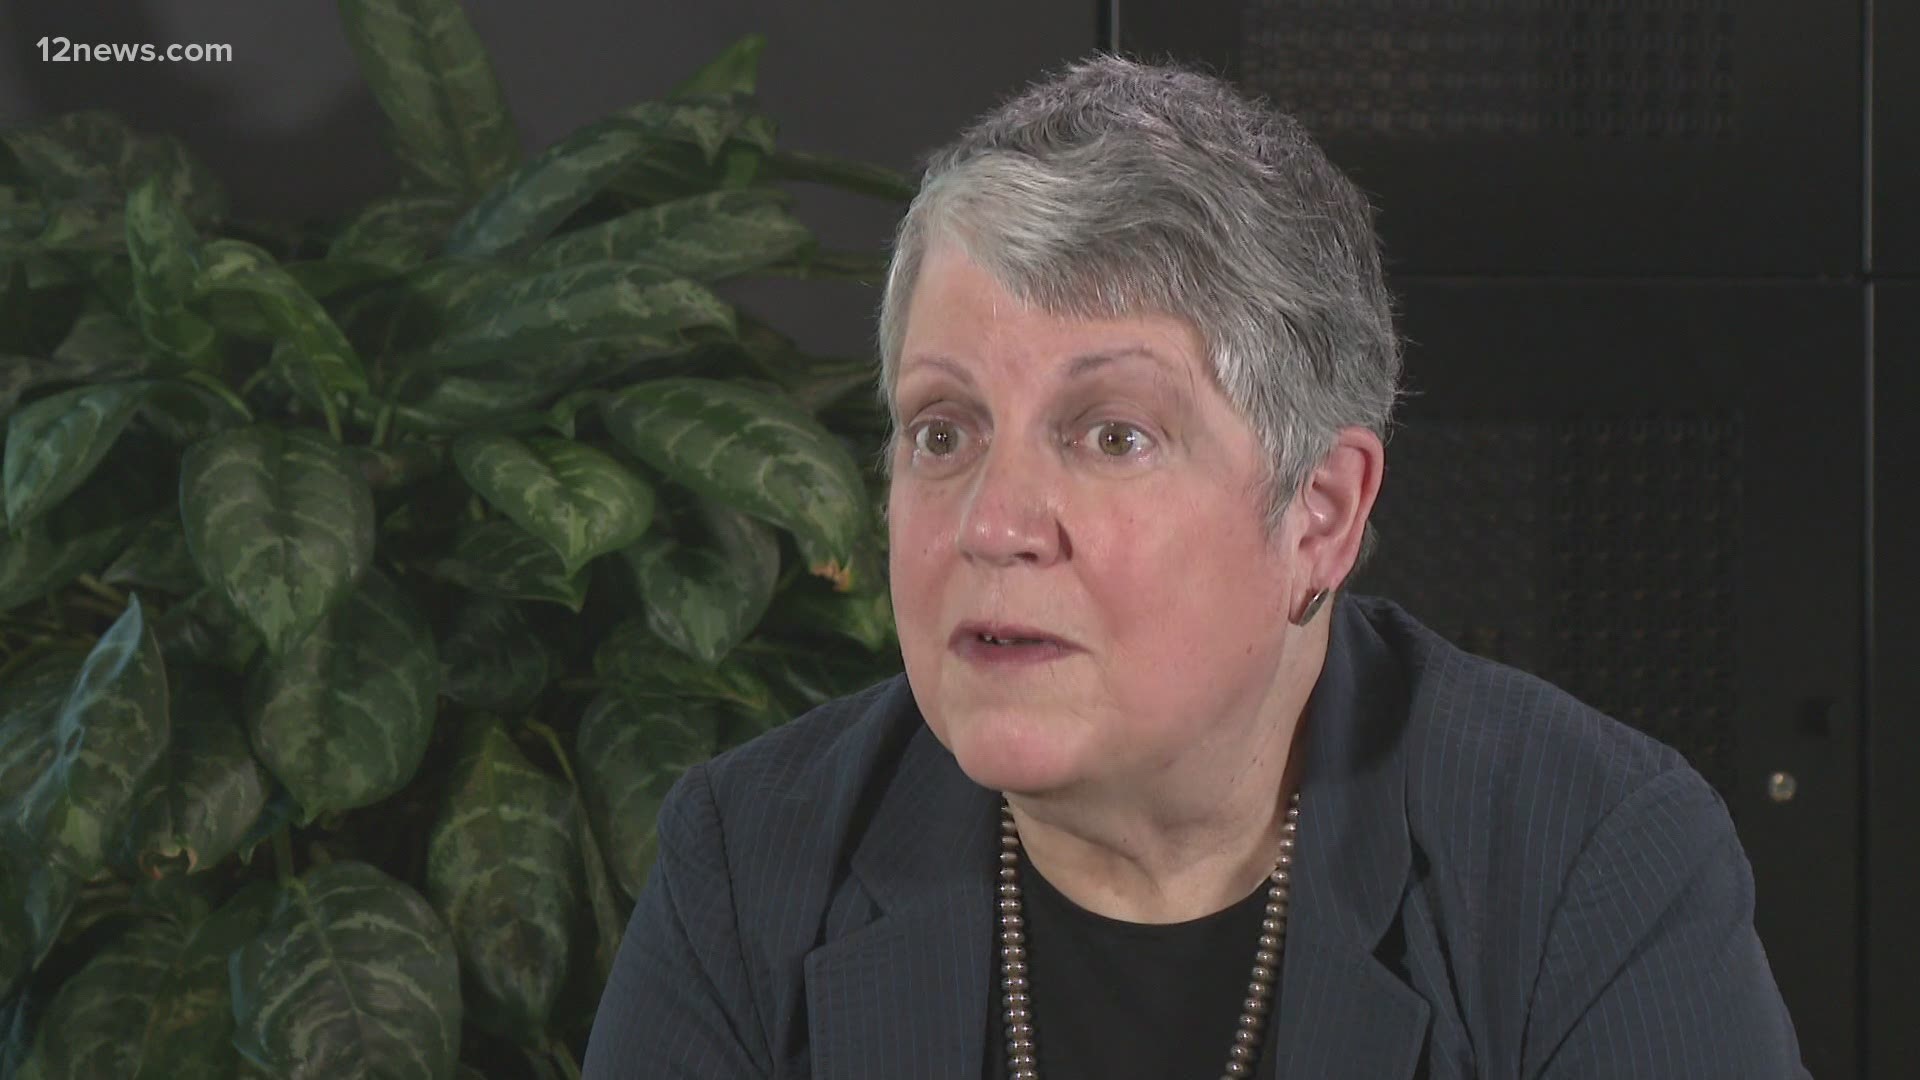 Former Arizona Governor Janet Napolitano stopped by 12 News for a one-on-one interview. She talked about whether Arizona is blue, red, or purple.